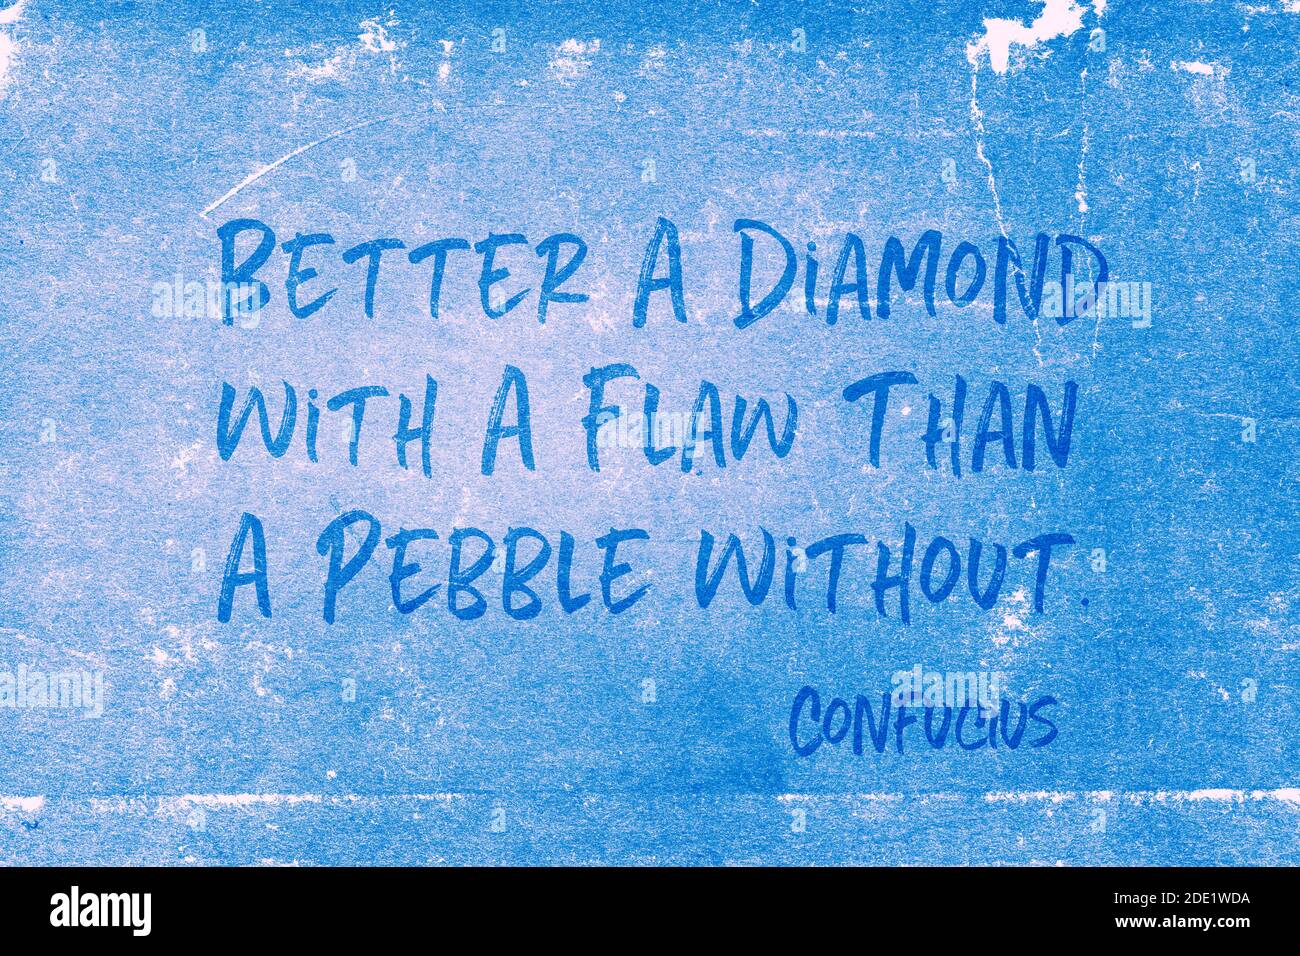 Better a diamond with a flaw than a pebble without - ancient Chinese  philosopher Confucius quote printed on grunge blue paper Stock Photo - Alamy